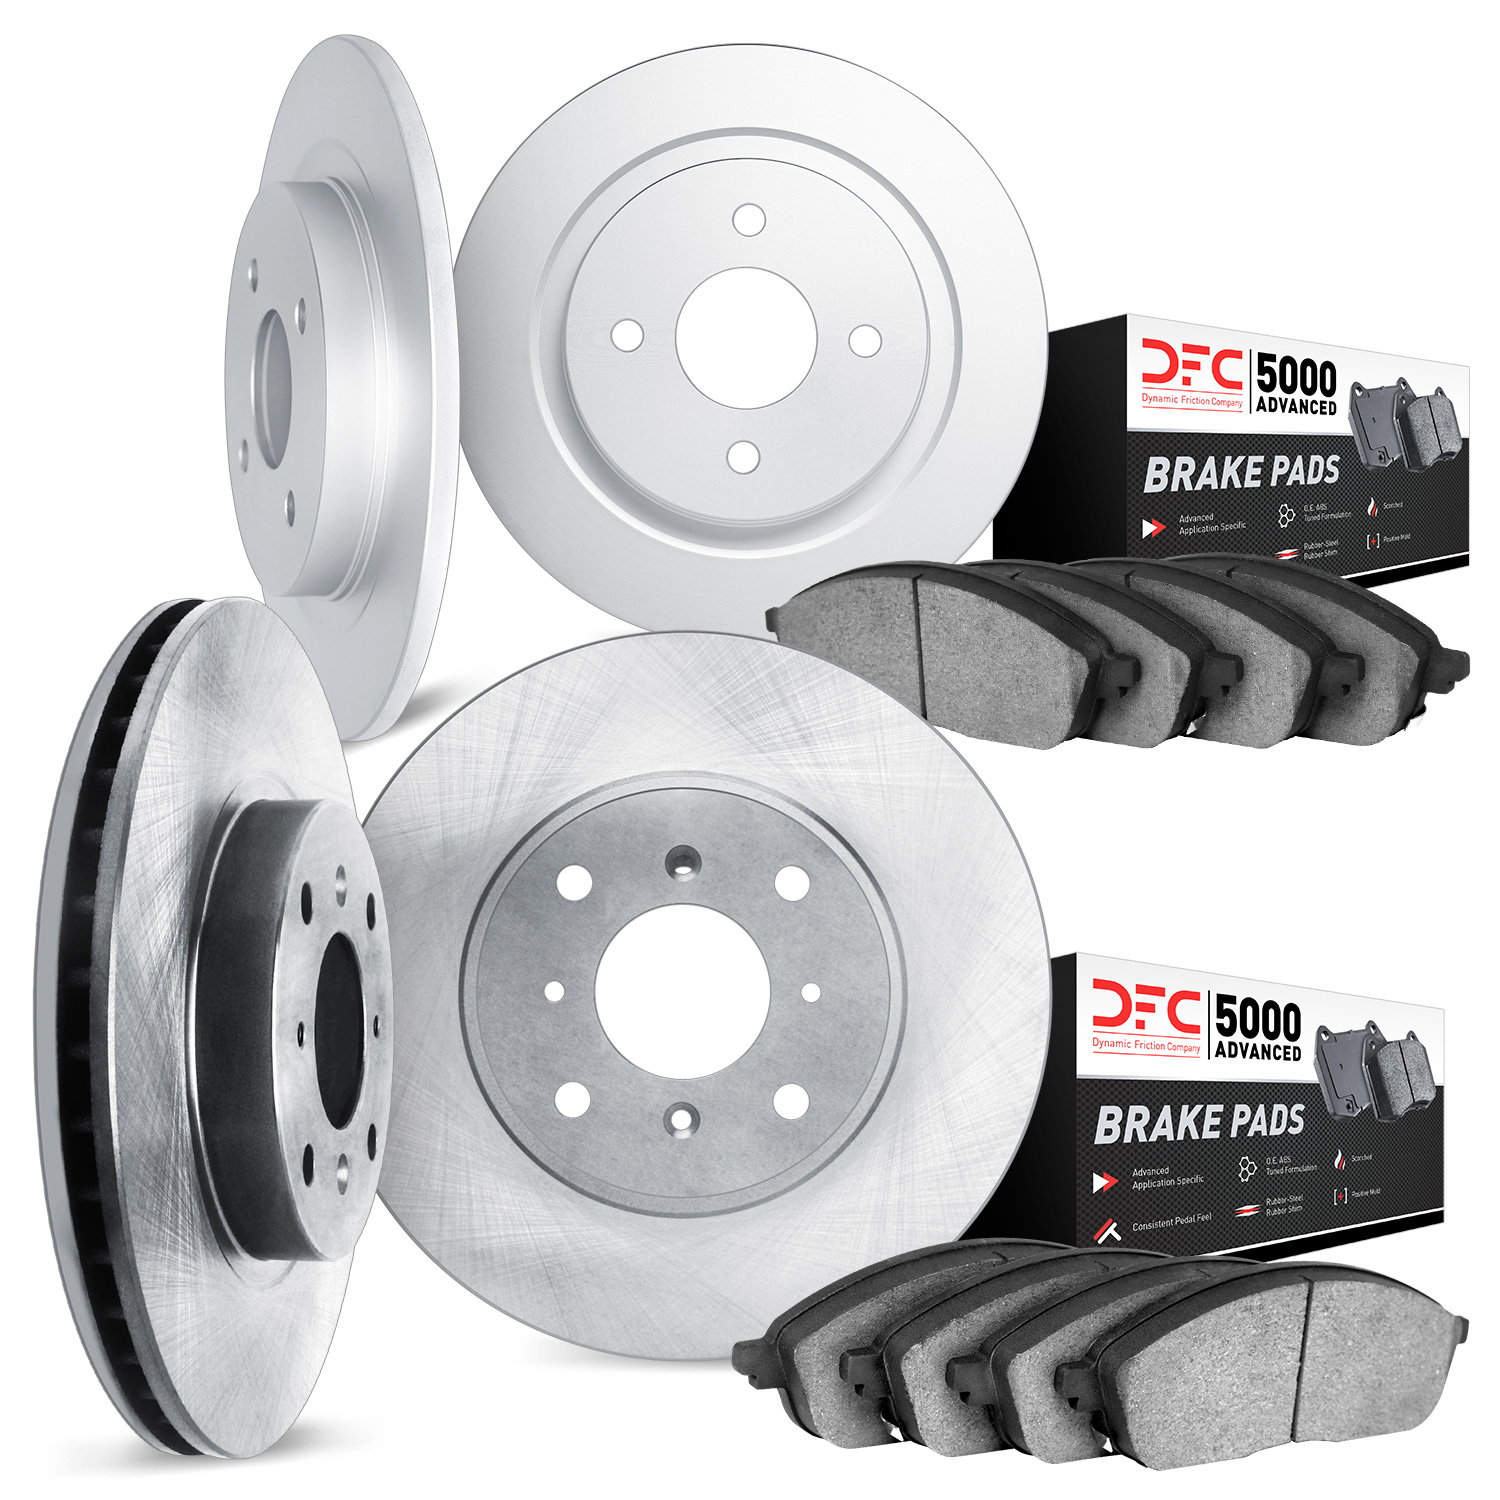 6504-76351 Brake Rotors w/5000 Advanced Brake Pads Kit, 1989-1992 Multiple Makes/Models, Position: Front and Rear